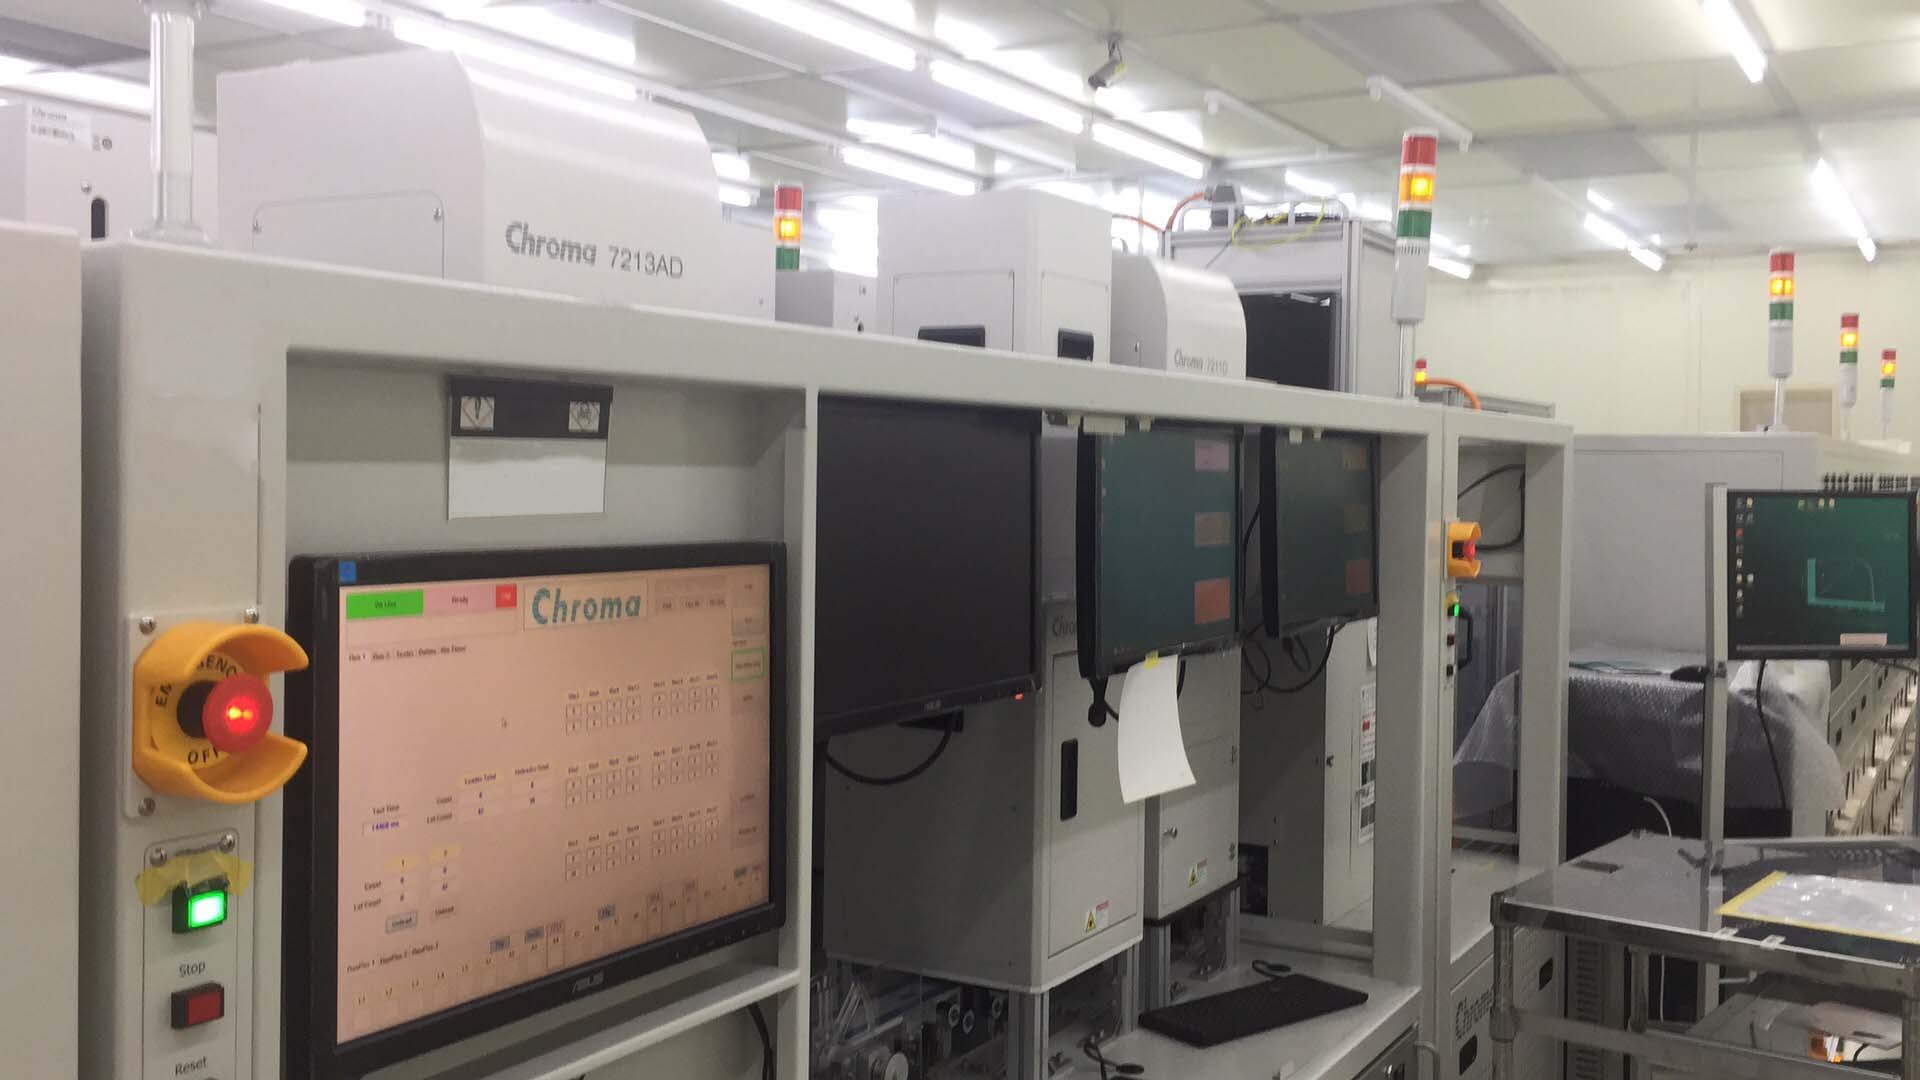 Photo Used BACCINI / AMAT / APPLIED MATERIALS Tempo For Sale